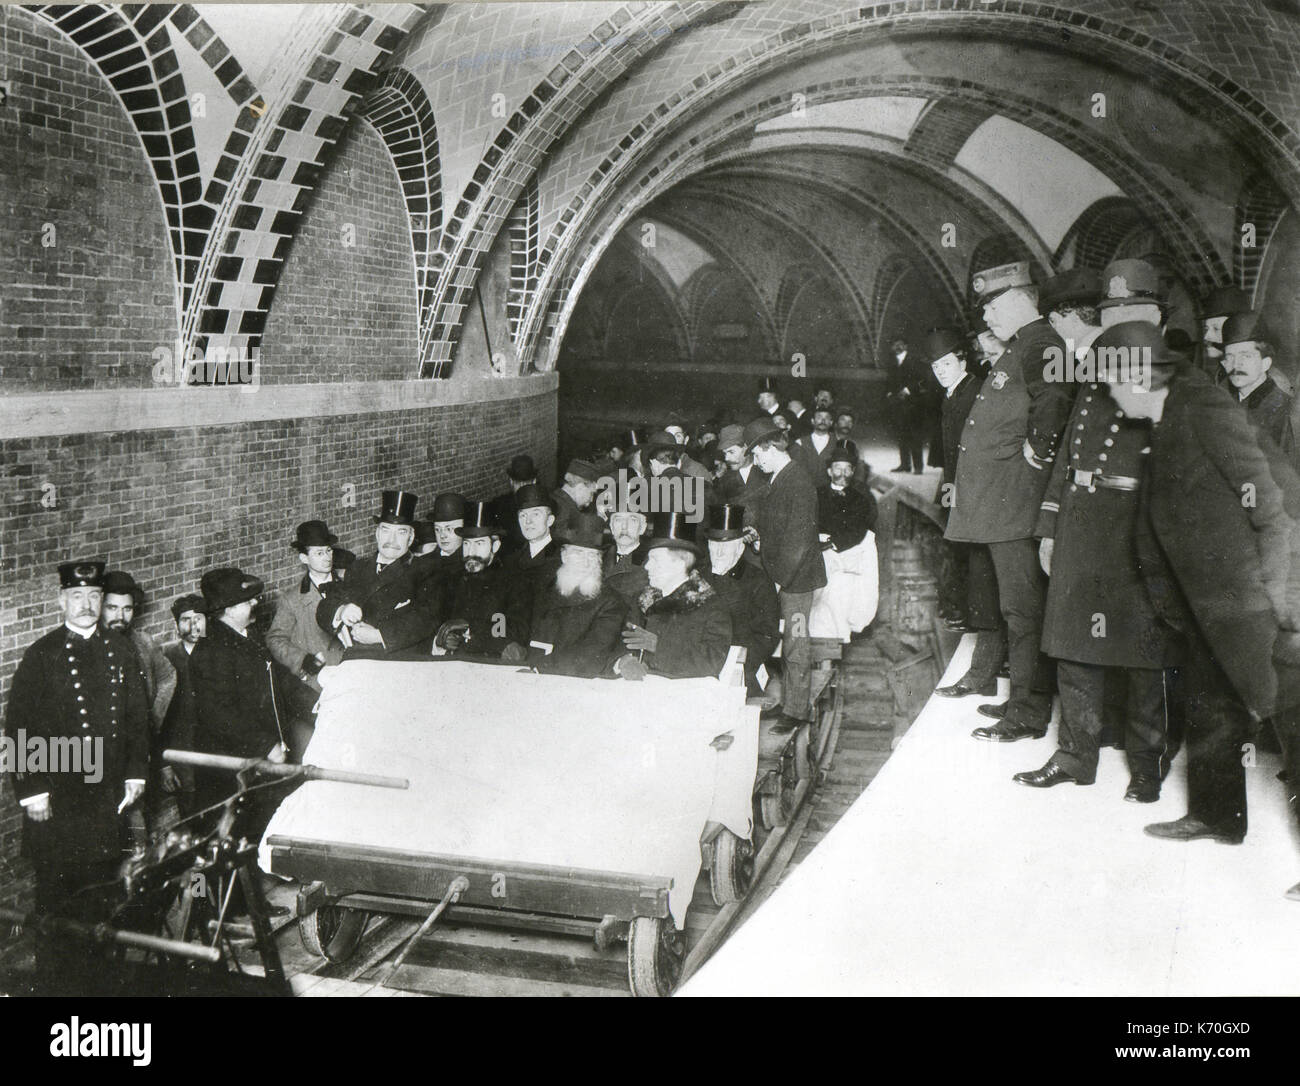 October 27, 1904, New York City - The first subway when opened, with municipal officials and civic and business leaders riding on the first train. At that time, the underground extended for 21 miles. Stock Photo